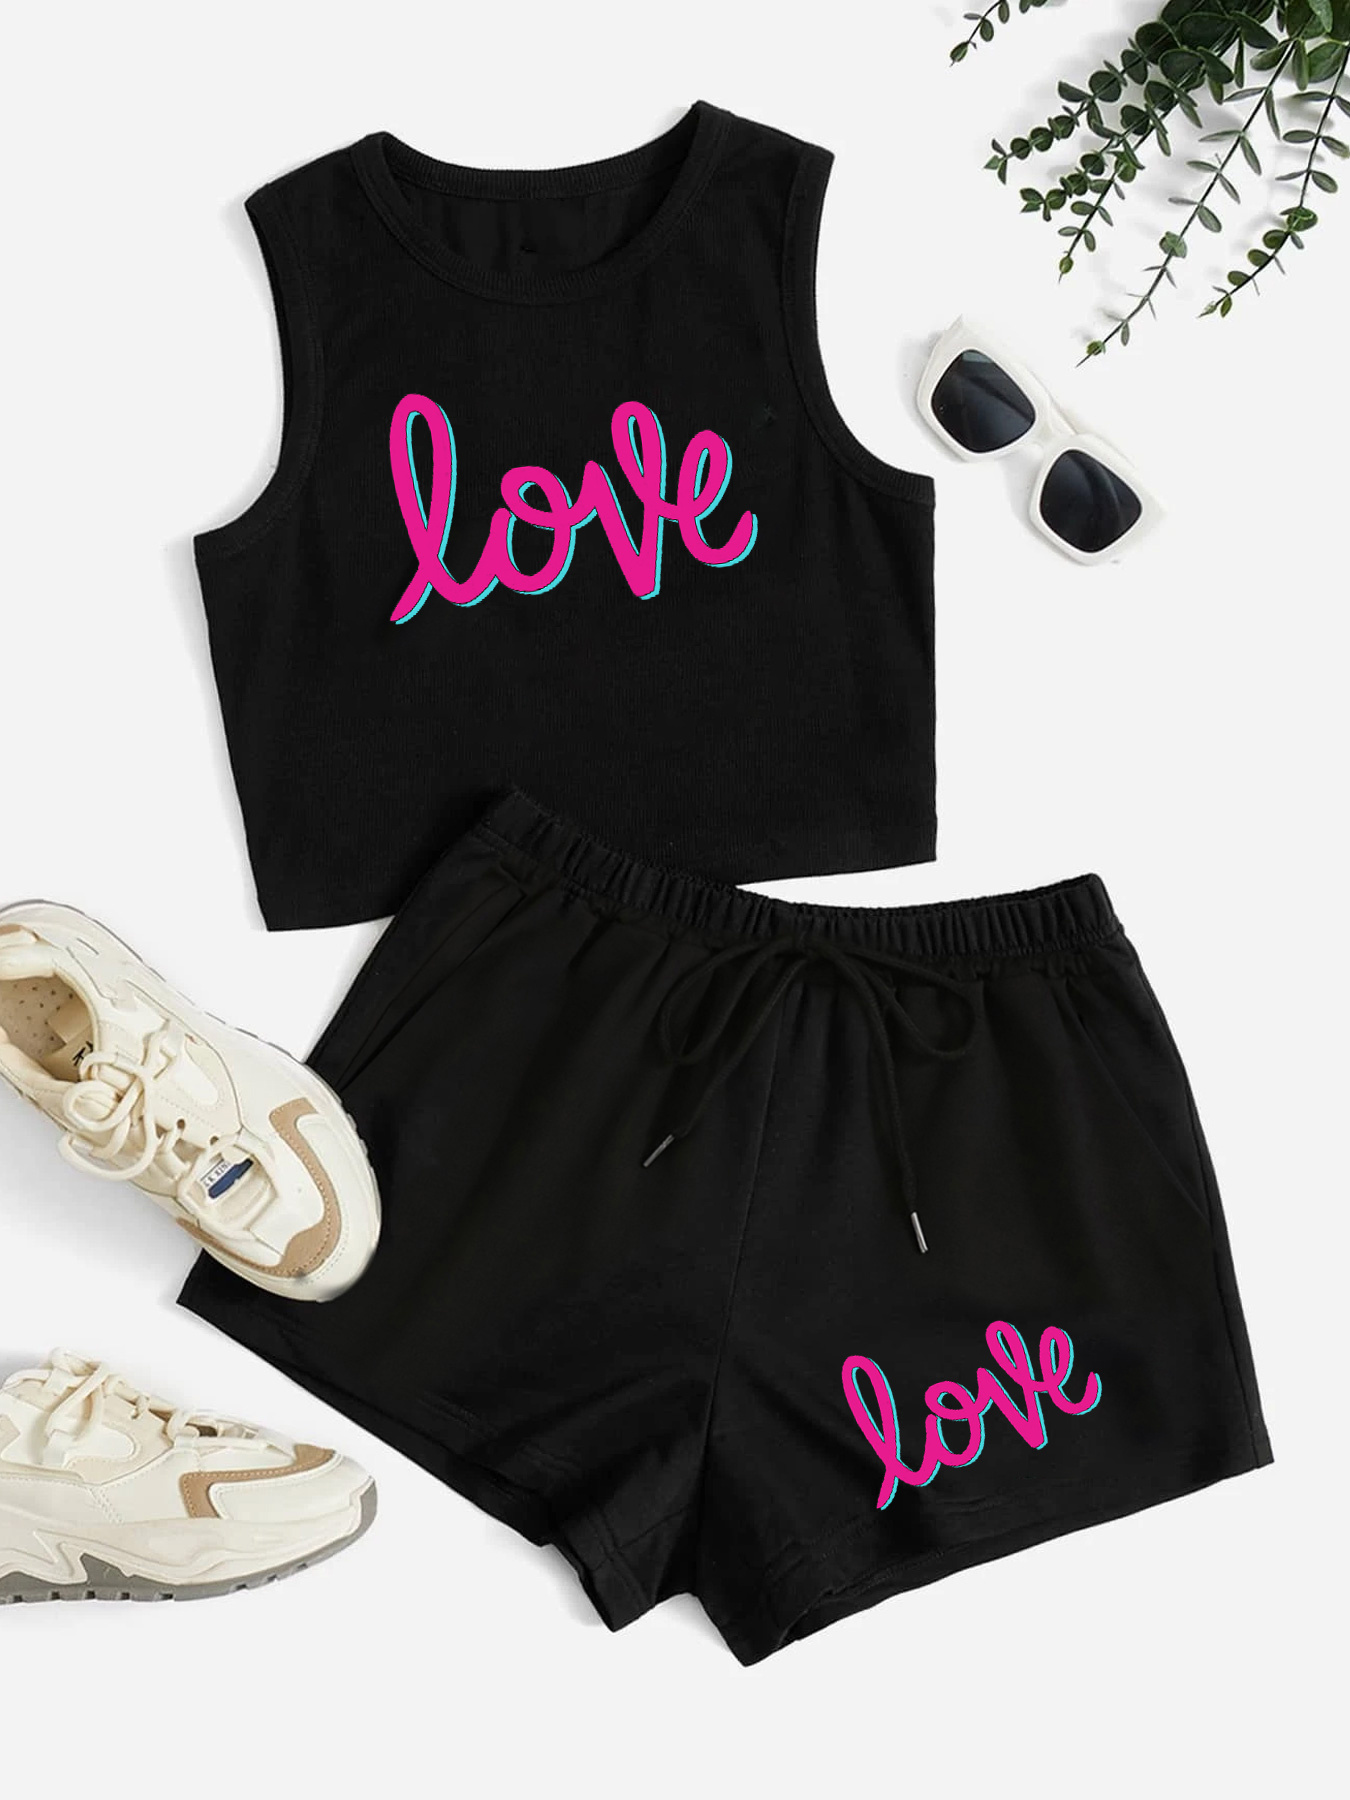 Summer Embroidered Womens Short Tracksuit Set Set Sleeveless Tank Top And  Shorts Outfit For Casual Sportswear Bulk Sale KLW6815 From Clover_3, $16.69